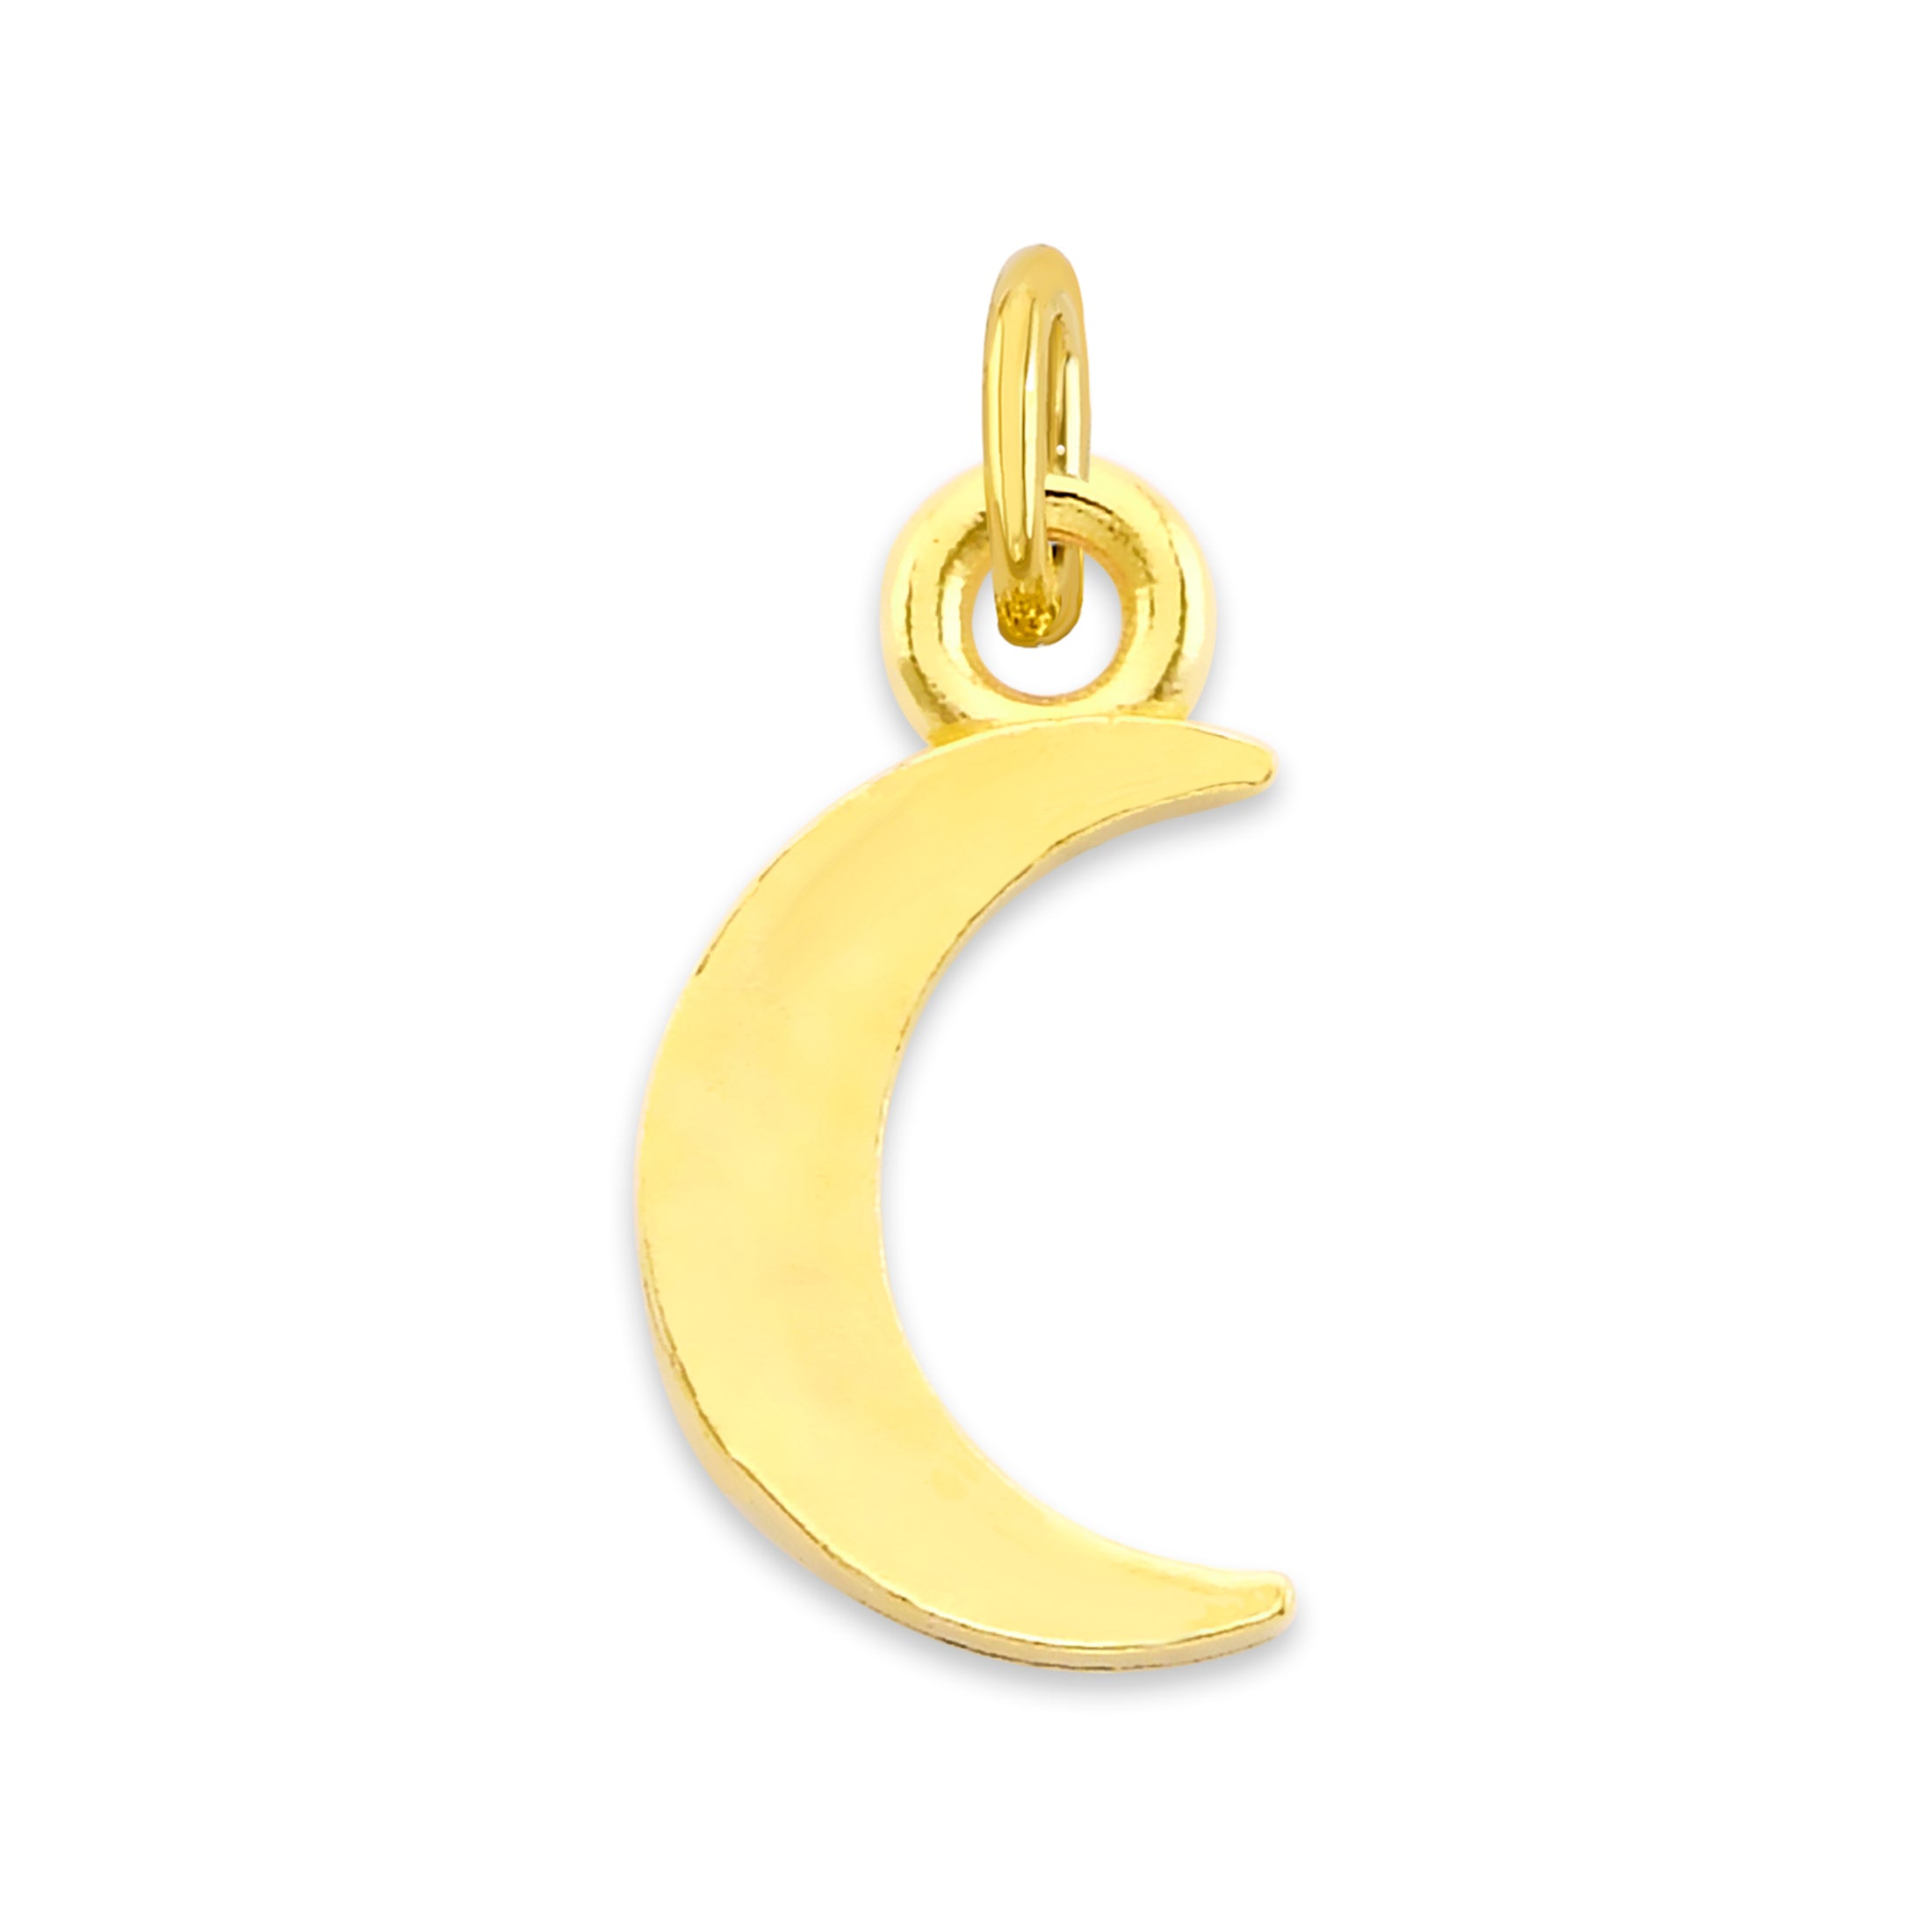 Solid Gold Moon Charm - 10k or 14k